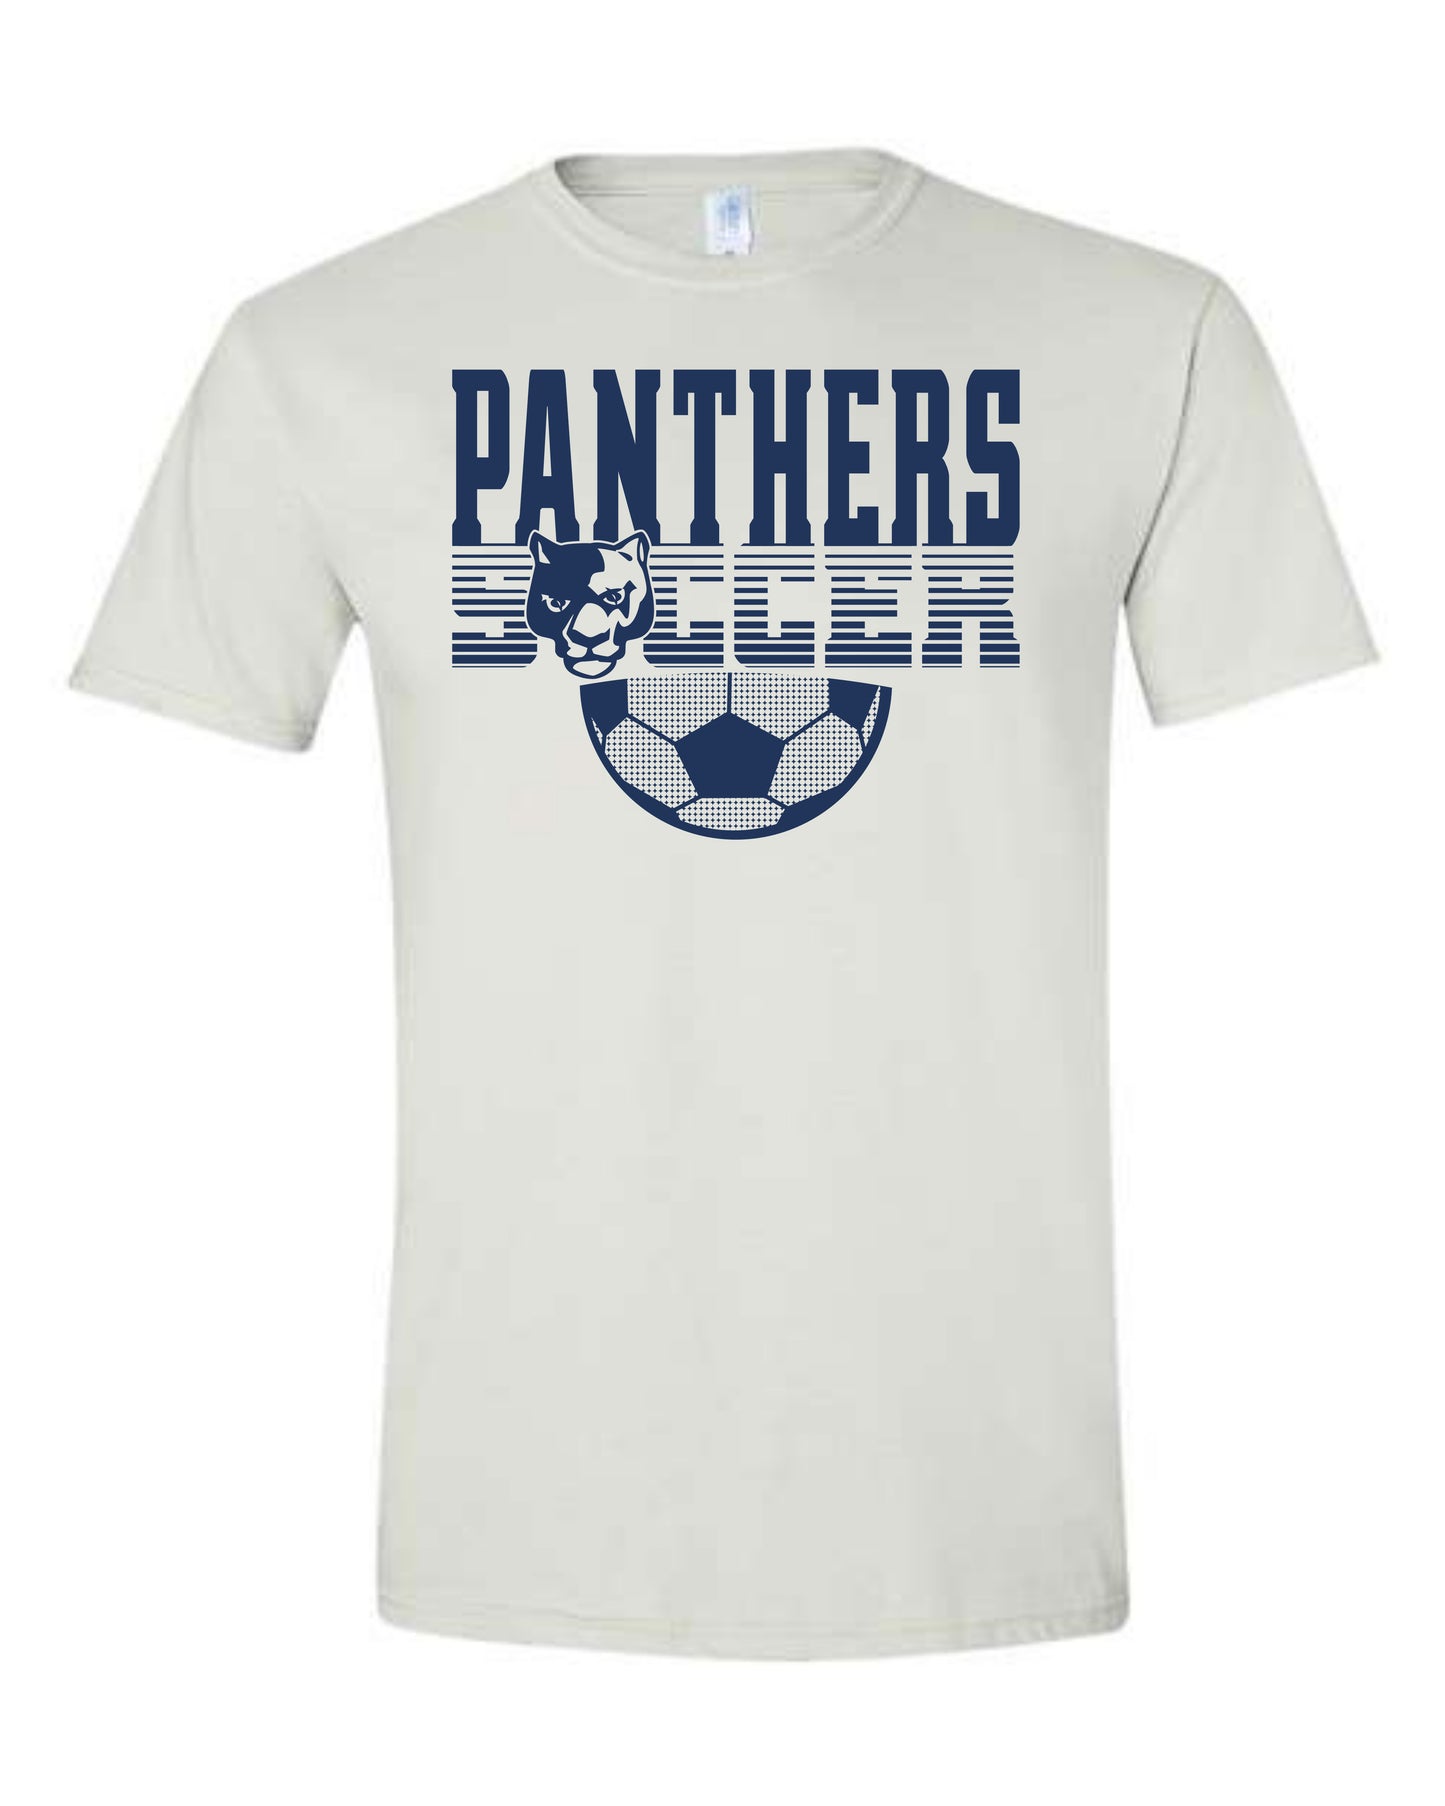 Panthers Soccer Faded - Adult Tee